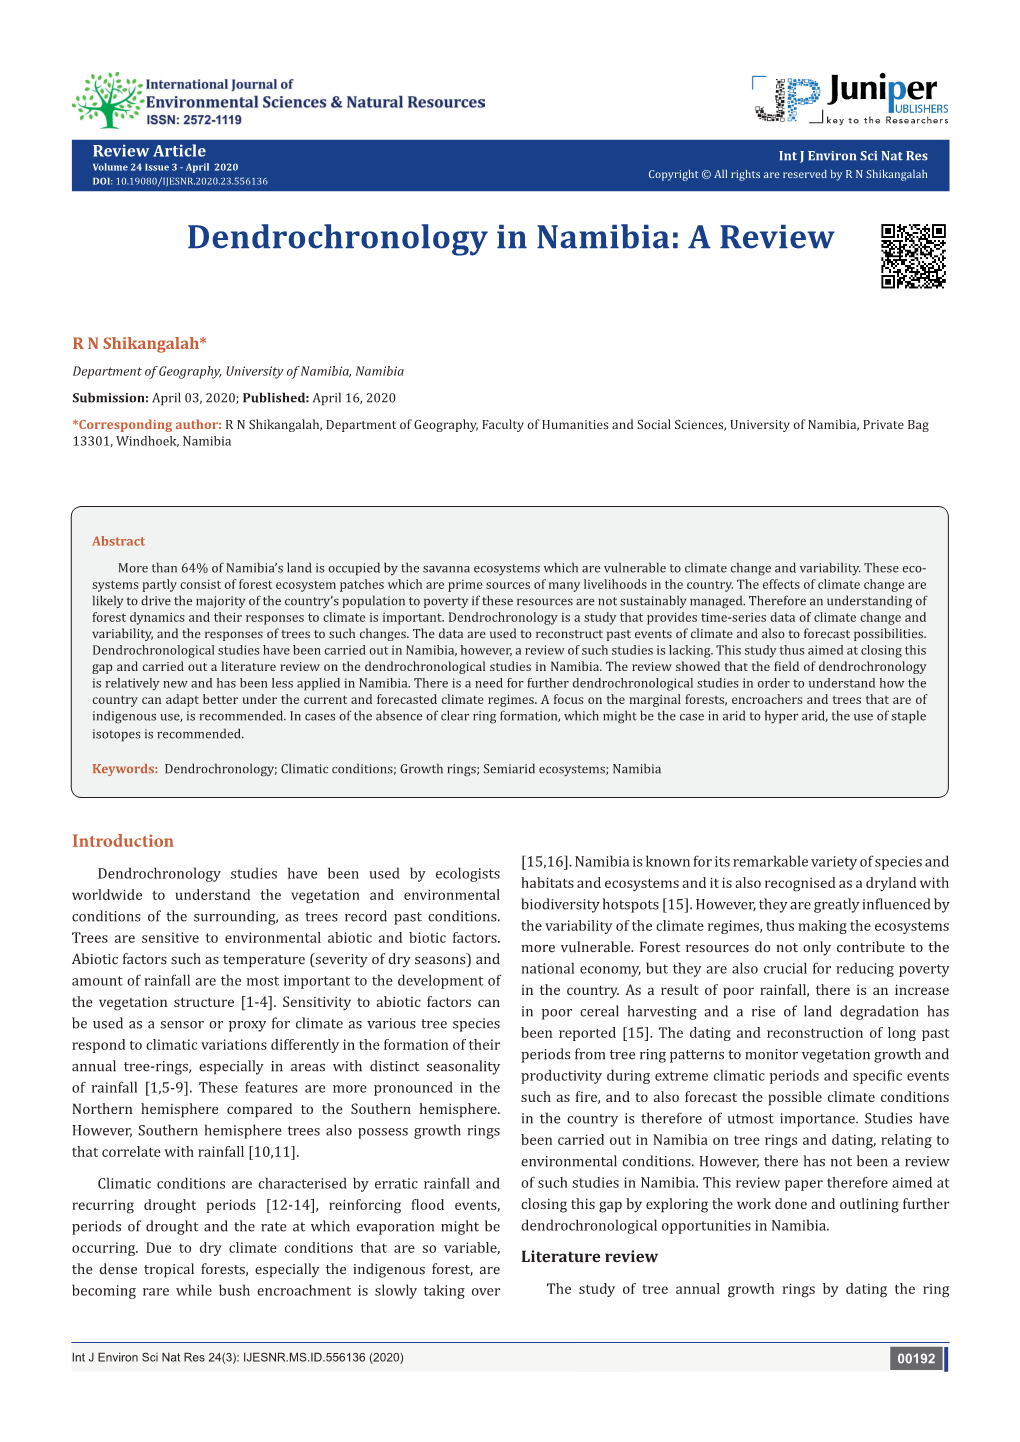 Dendrochronology in Namibia: a Review